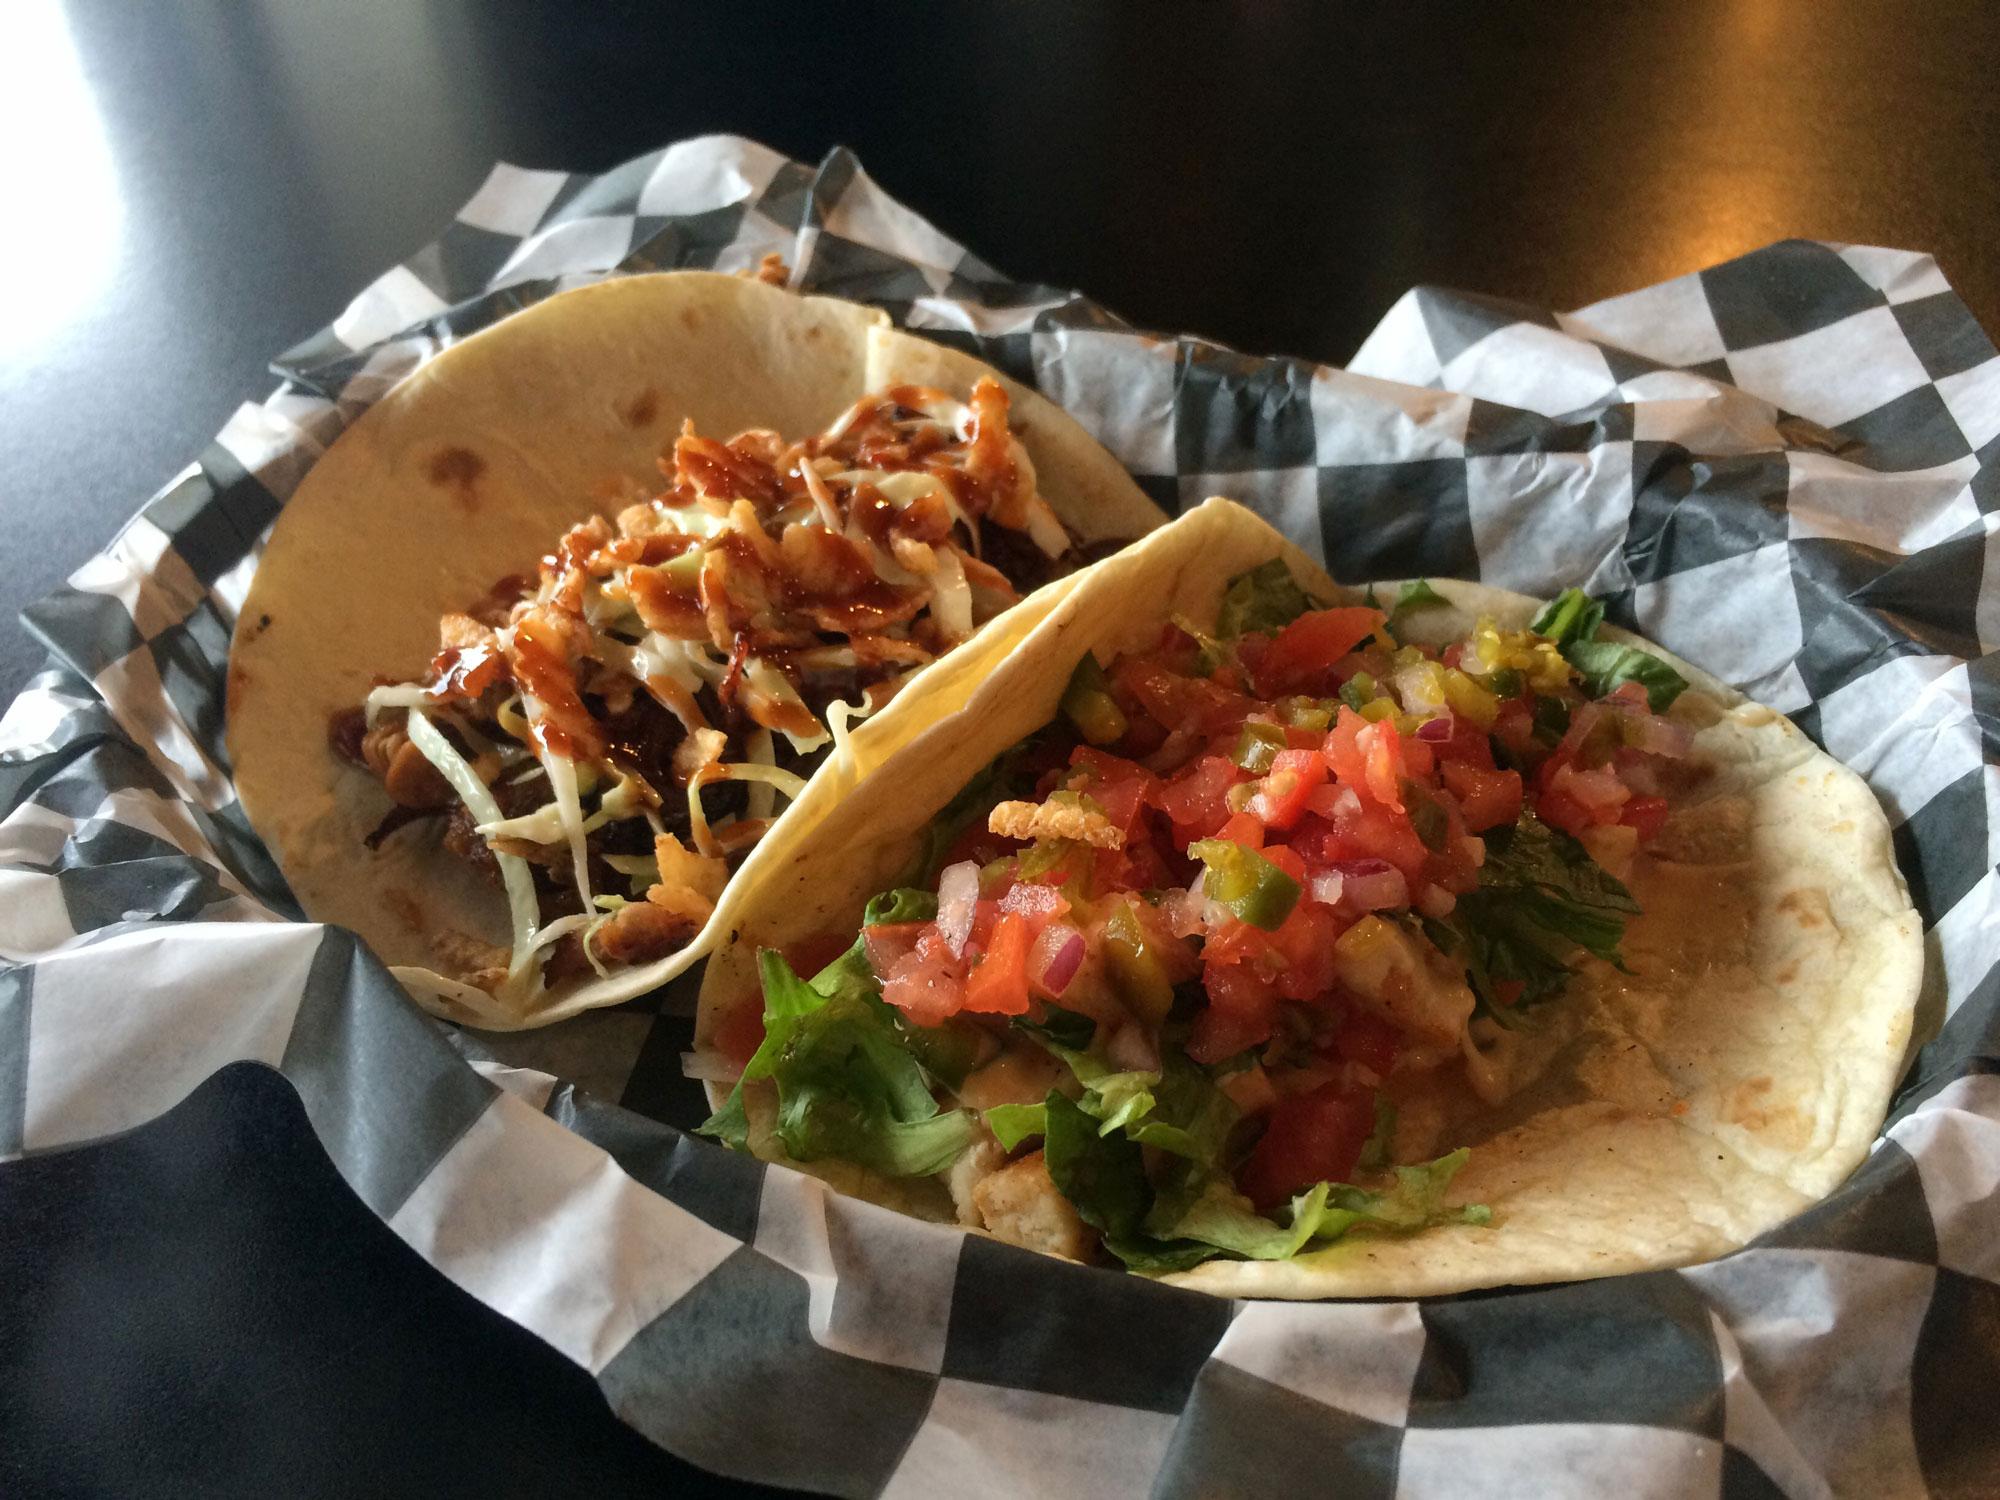 From left to right: TApp Room's barbecue and chicken tacos. The barbecue taco features crispy onion sticks and the chicken tacos are topped with fresh house-made pico de gallo.